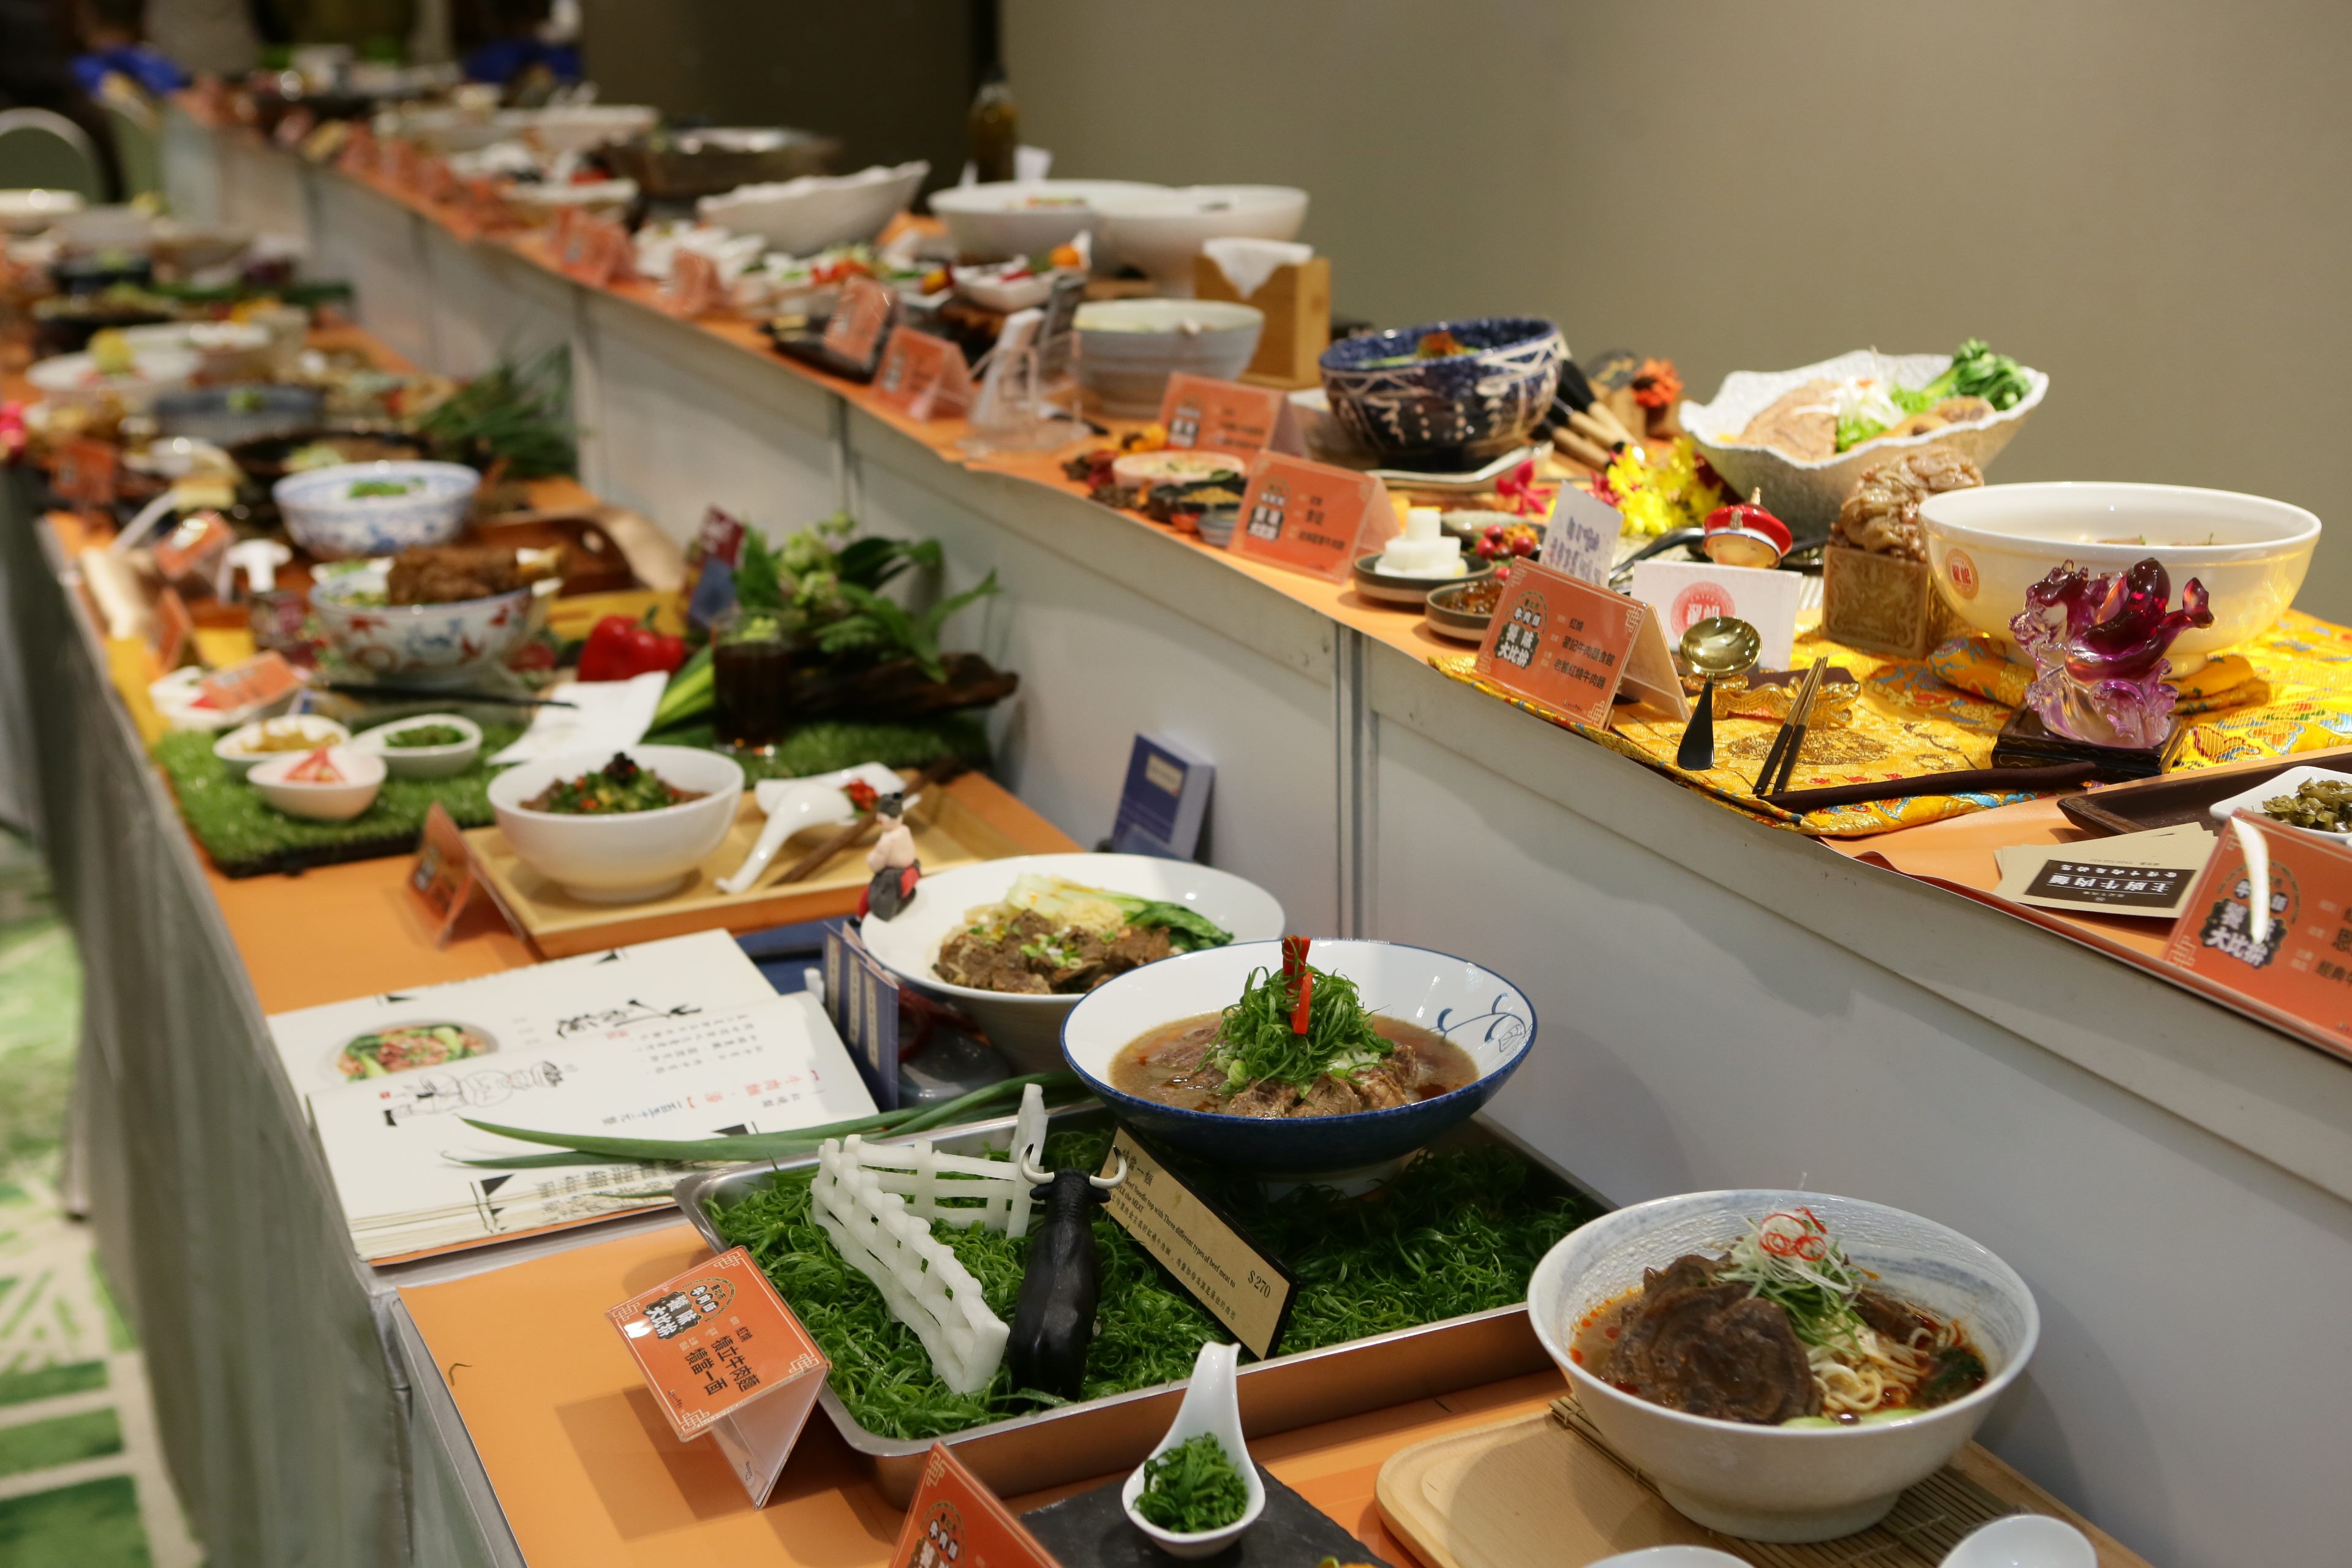 A selection of the beef noodles competing in this year’s event